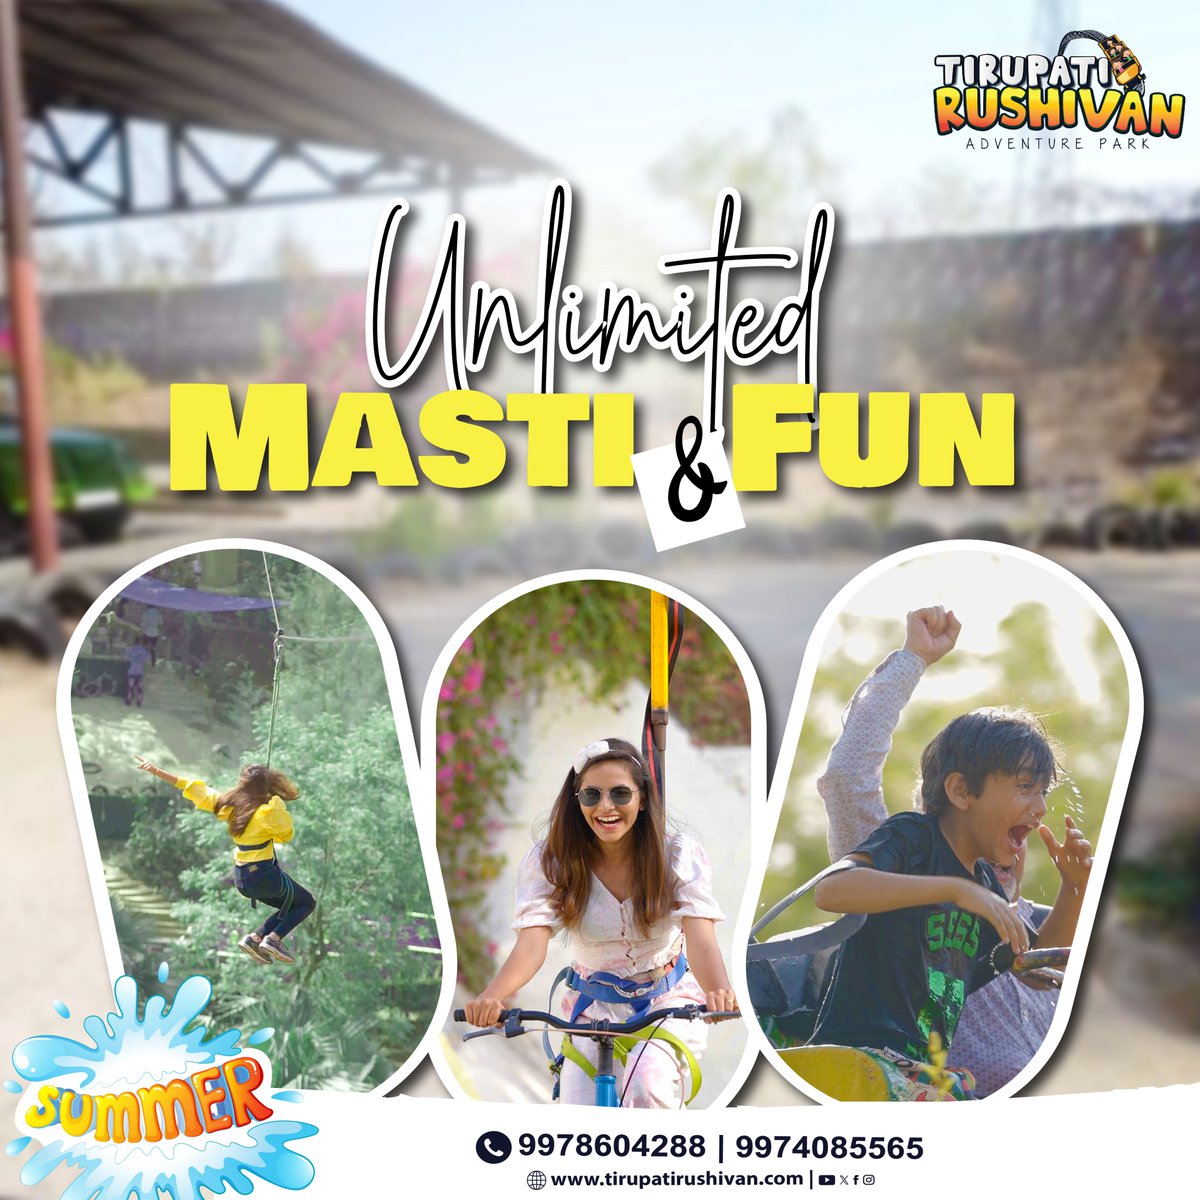 A perfect Place for Unlimited Fun & Masti at #TirupatiRushivan

Plan your weekend today!
Inquire Now: 9978604288/9974085565
.
.
.
#adventurepark #waterpark #watershoot #waterrides🌊 #angrybird #ride #thrilling #fun #FunWithFriends #familyfun #excitement #funrides